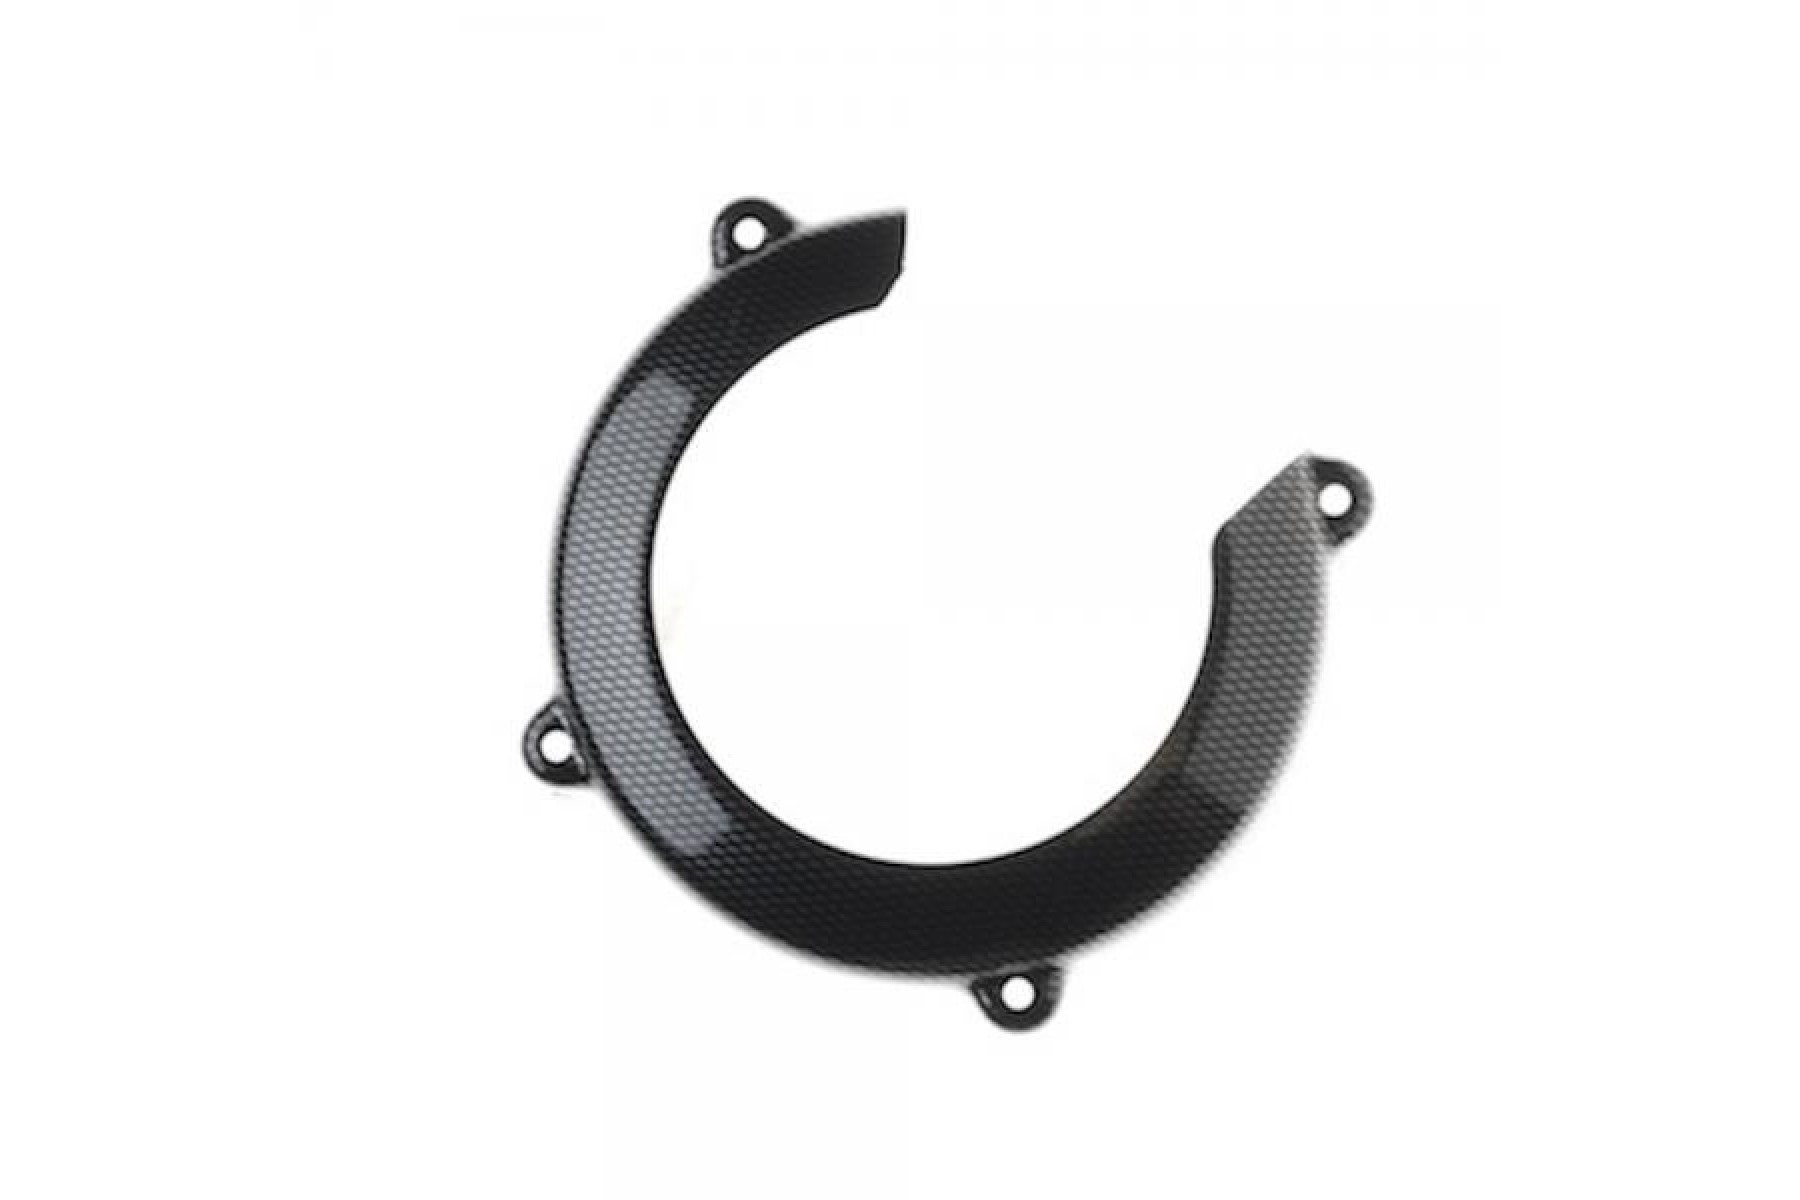 EVO CLUTCH COVER PROTECTOR